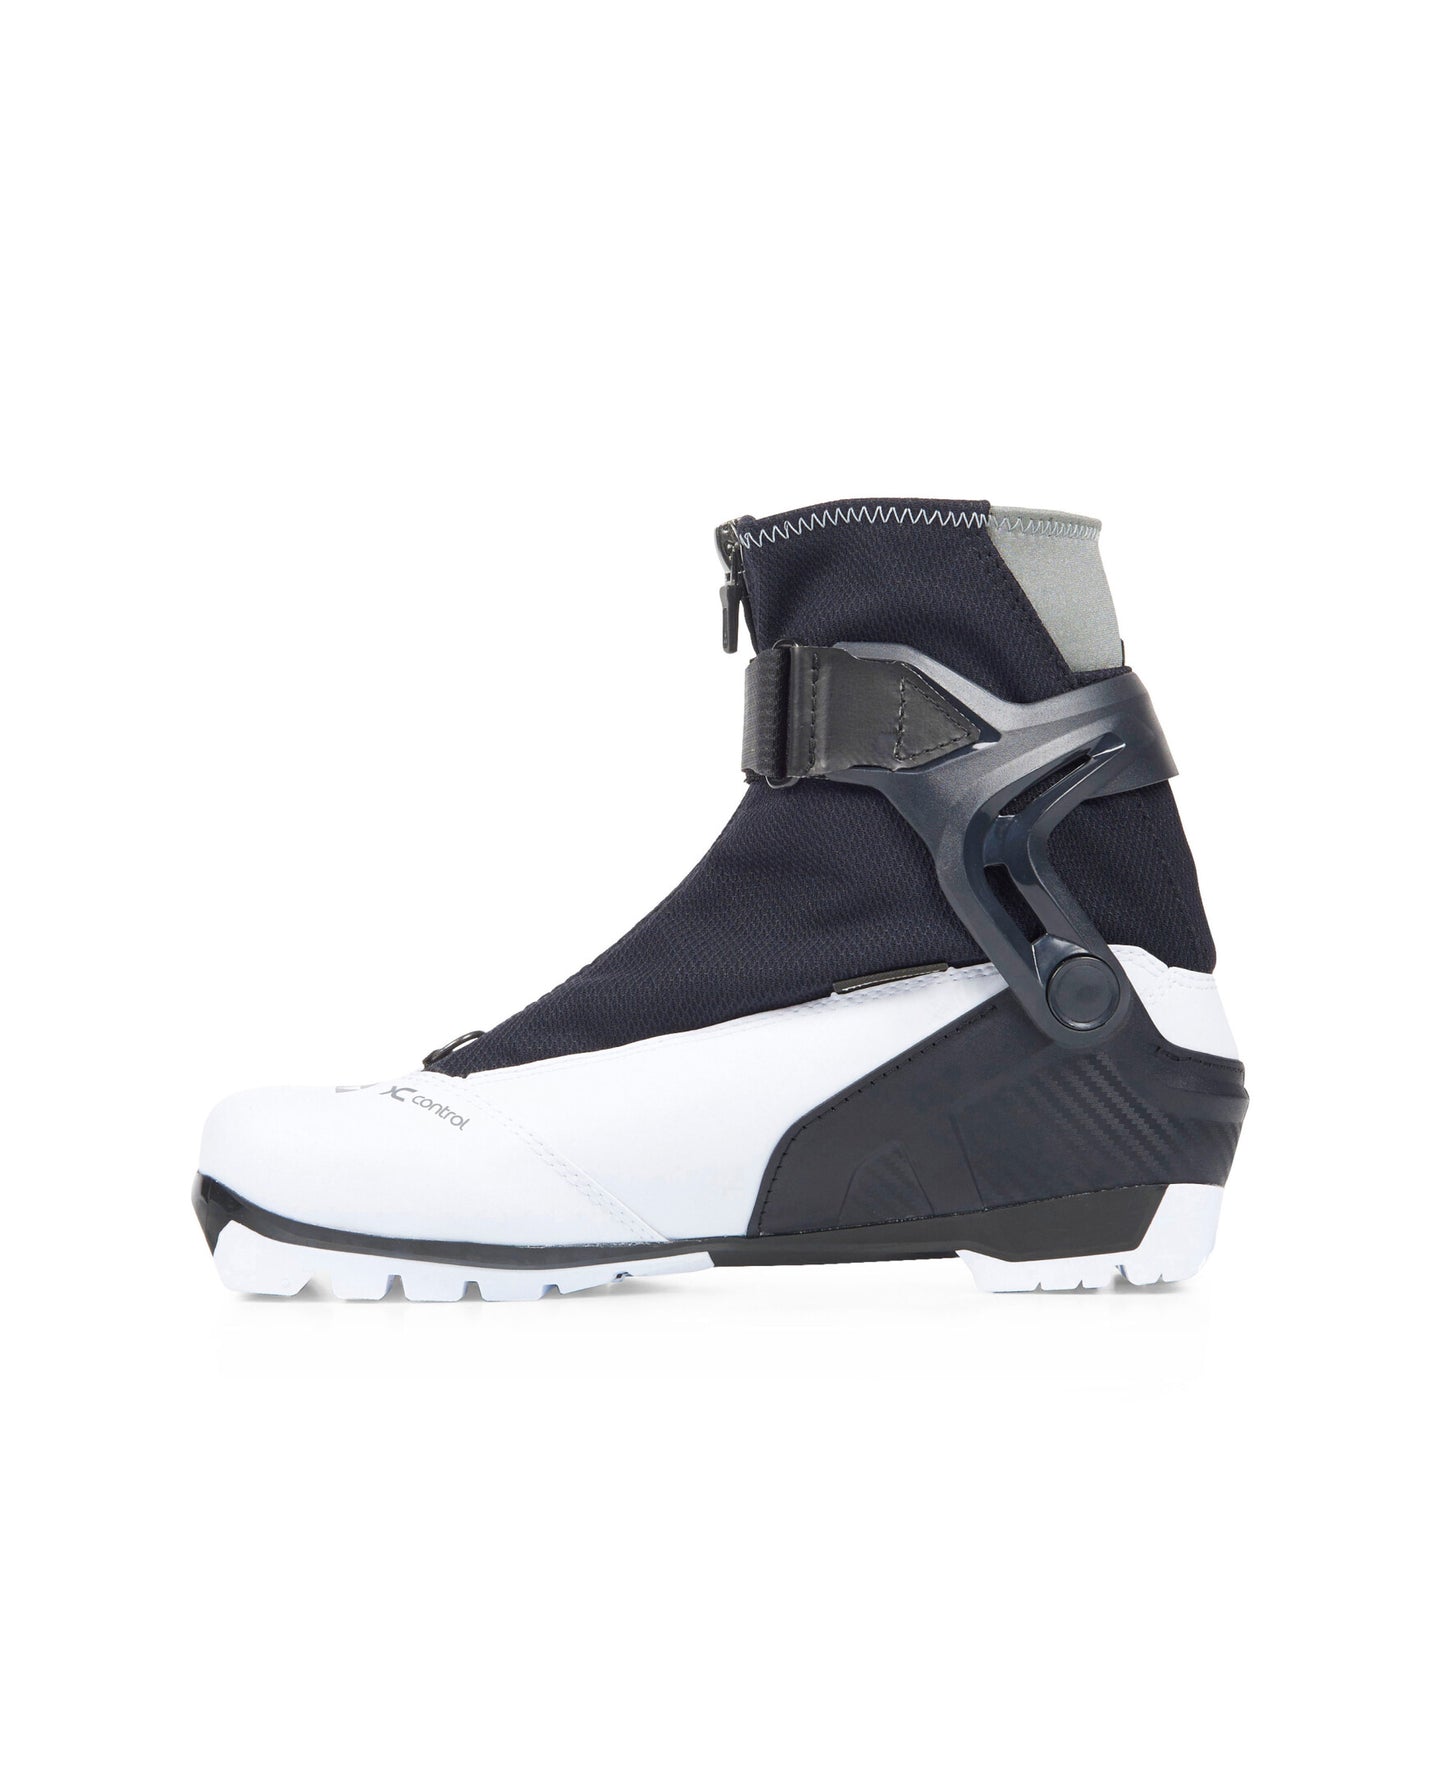 Fischer XC Control My Style Nordic Ski Boots